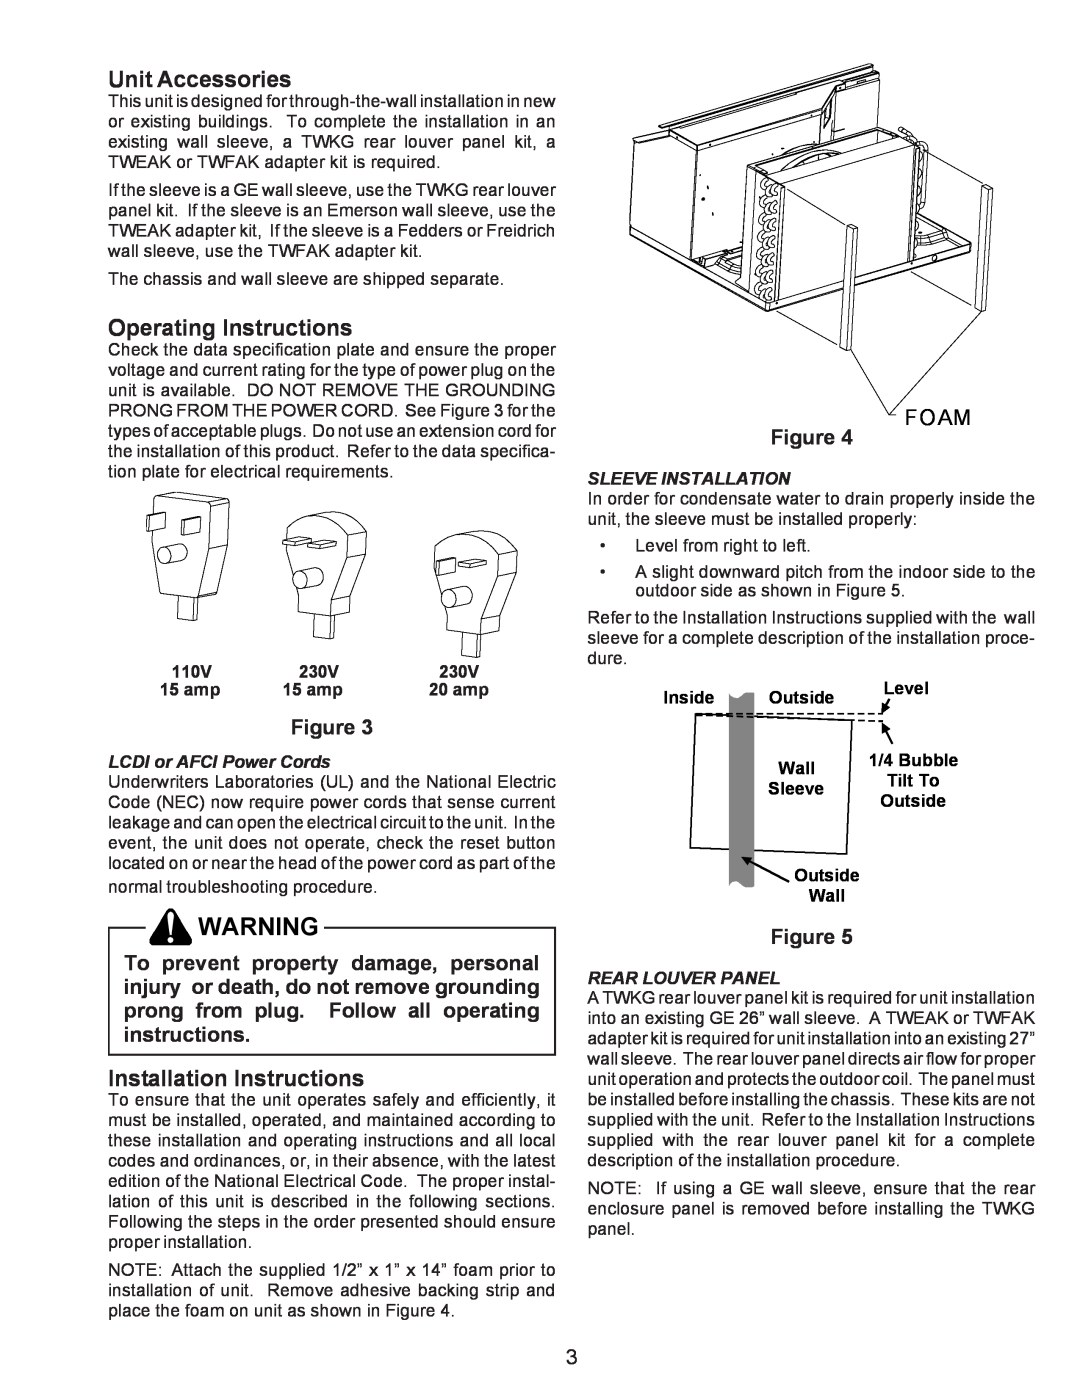 Maytag Thru-the-Wall Room Air Conditioner Unit Accessories, Operating Instructions, Installation Instructions, Foam, 110V 